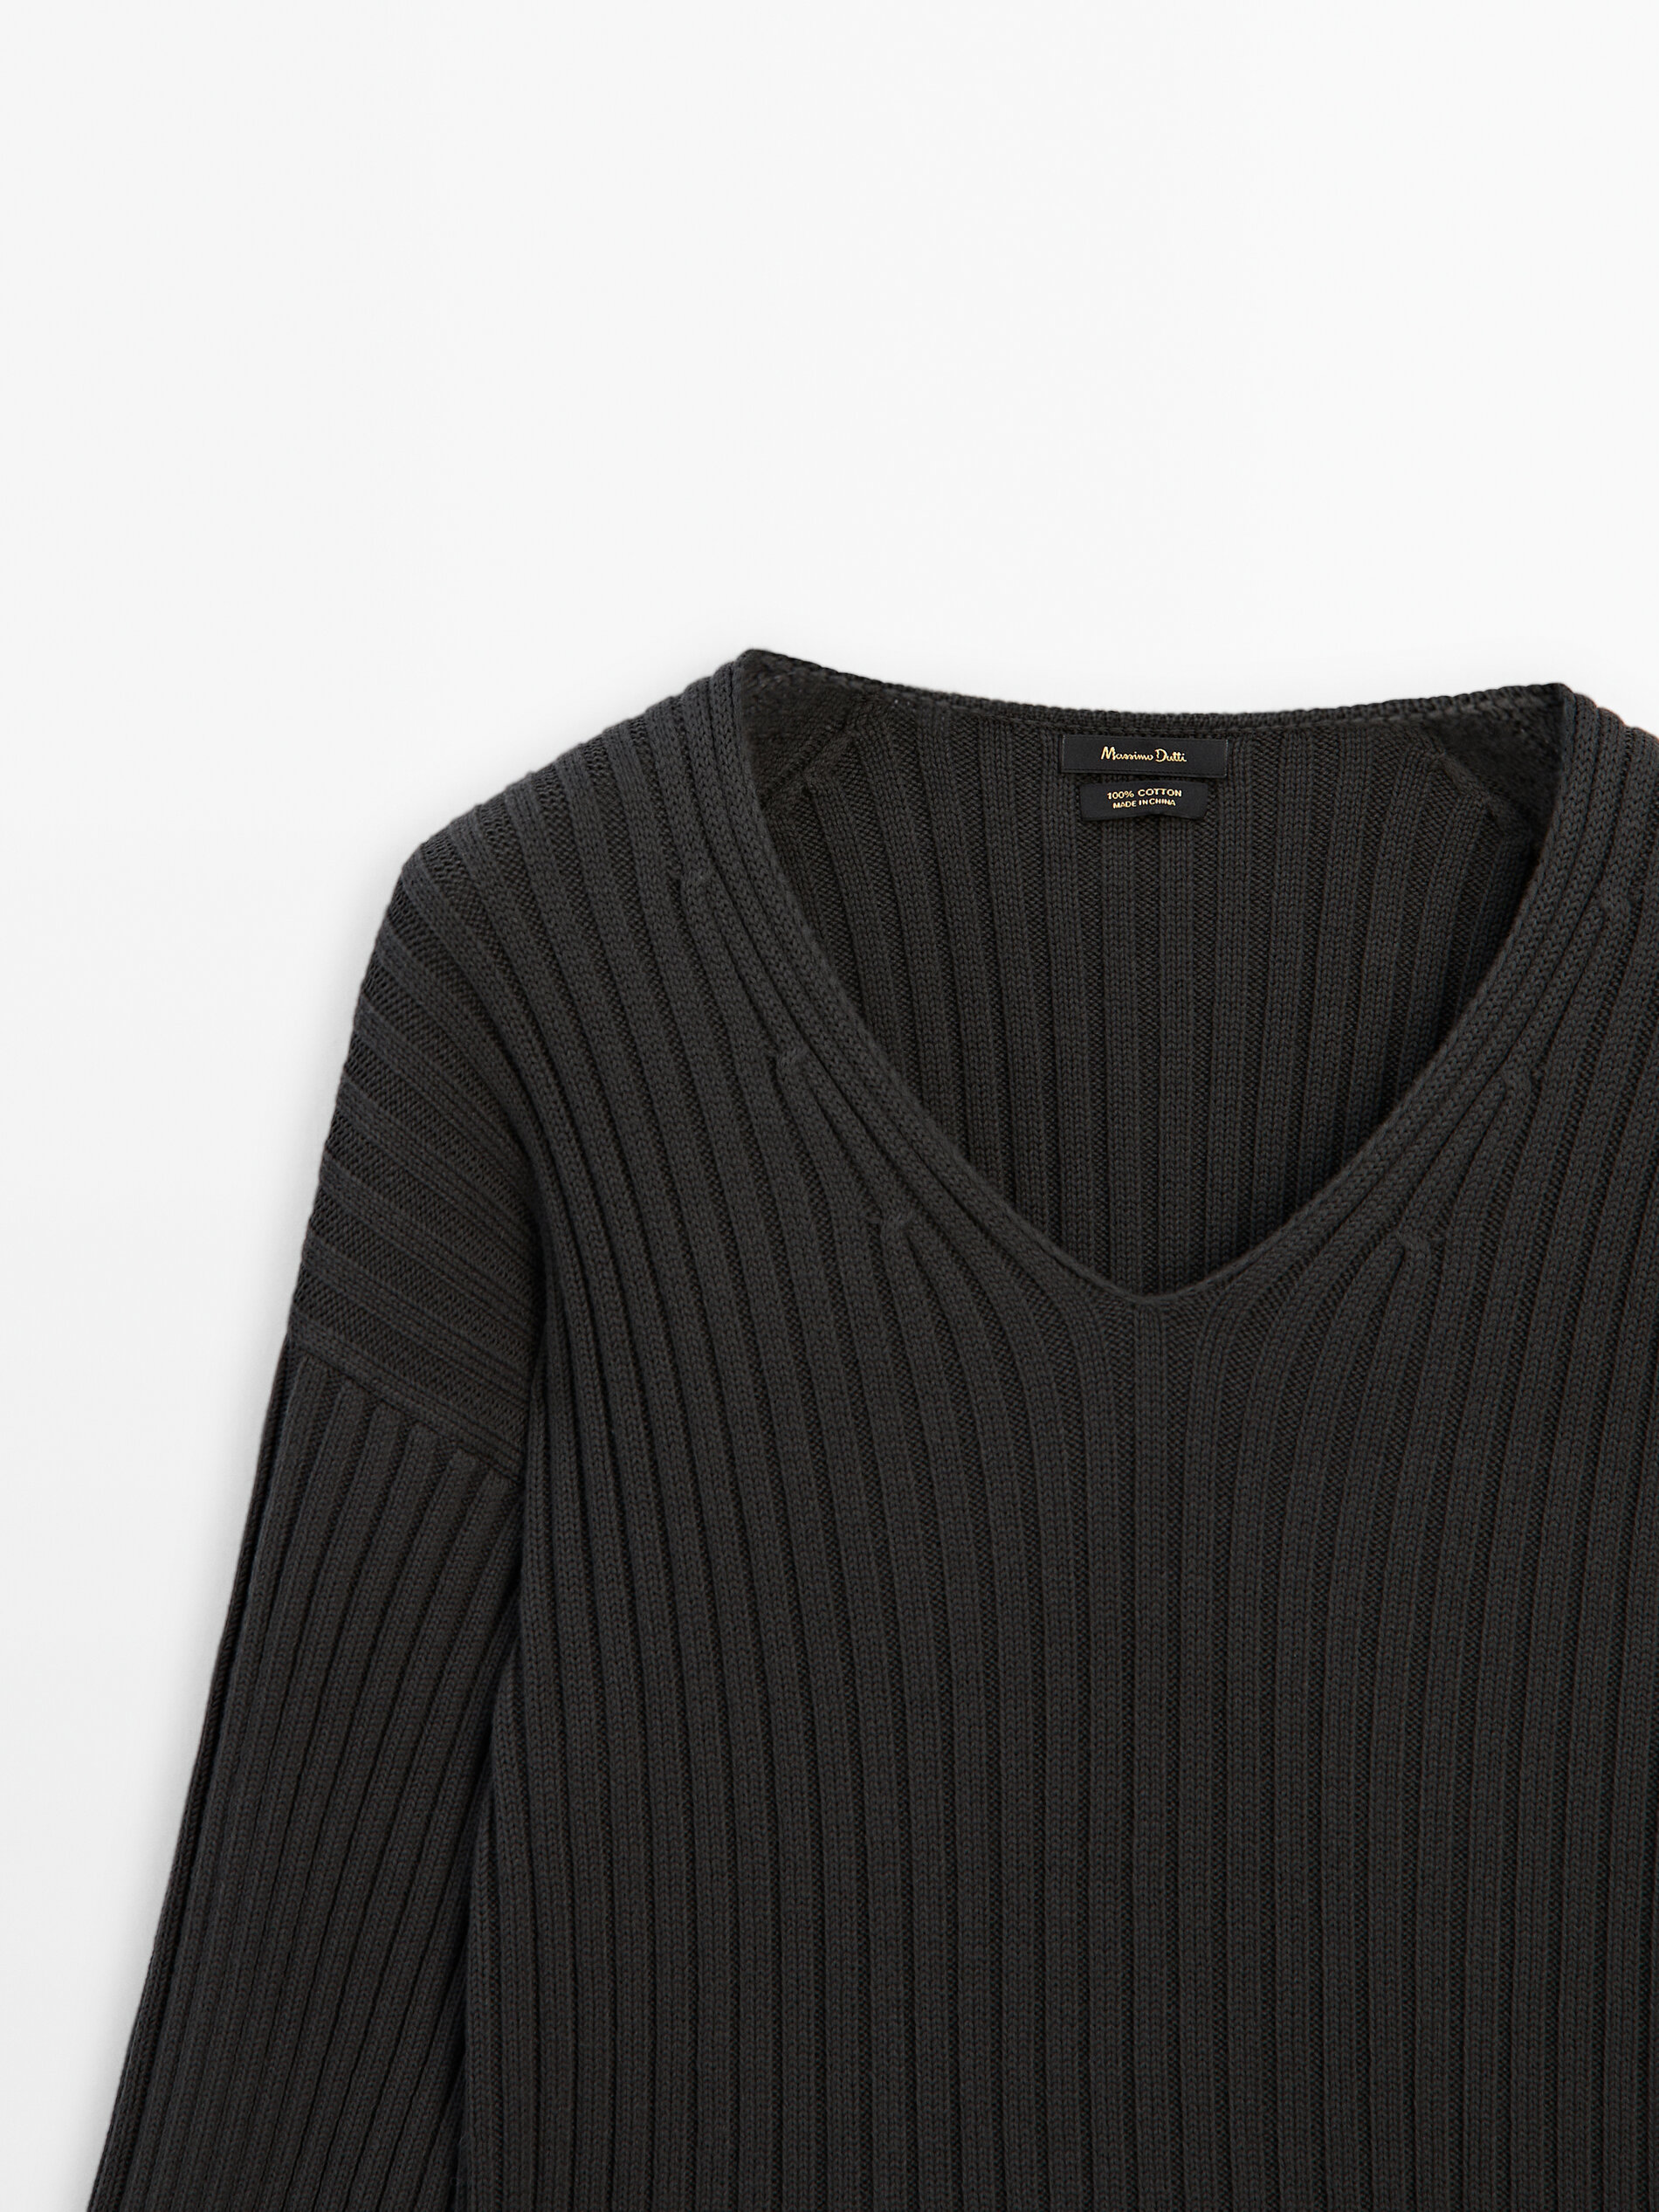 Ribbed knit cotton V-neck sweater · Lead · Sweaters And Cardigans 